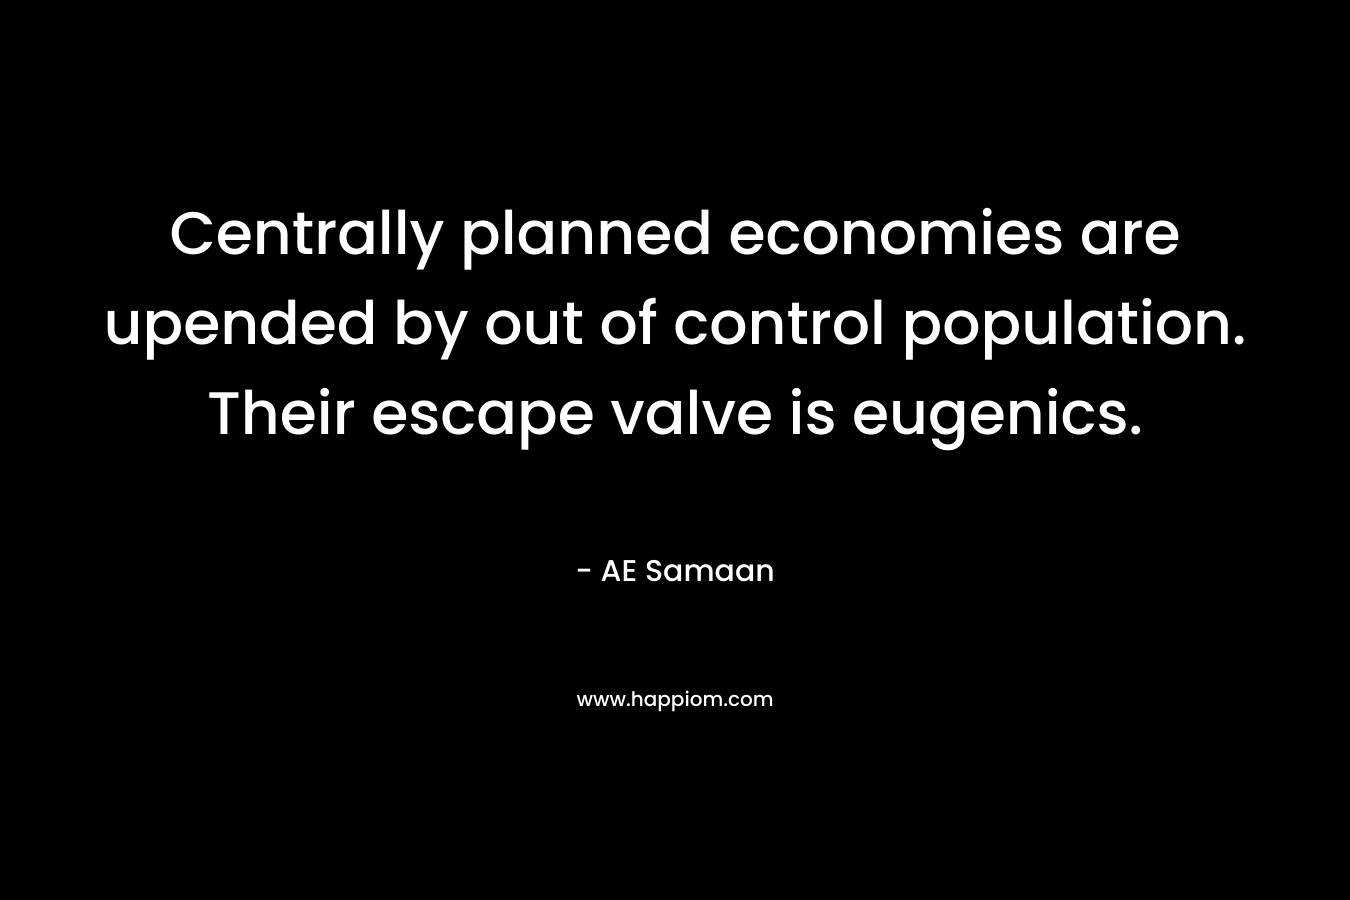 Centrally planned economies are upended by out of control population. Their escape valve is eugenics.